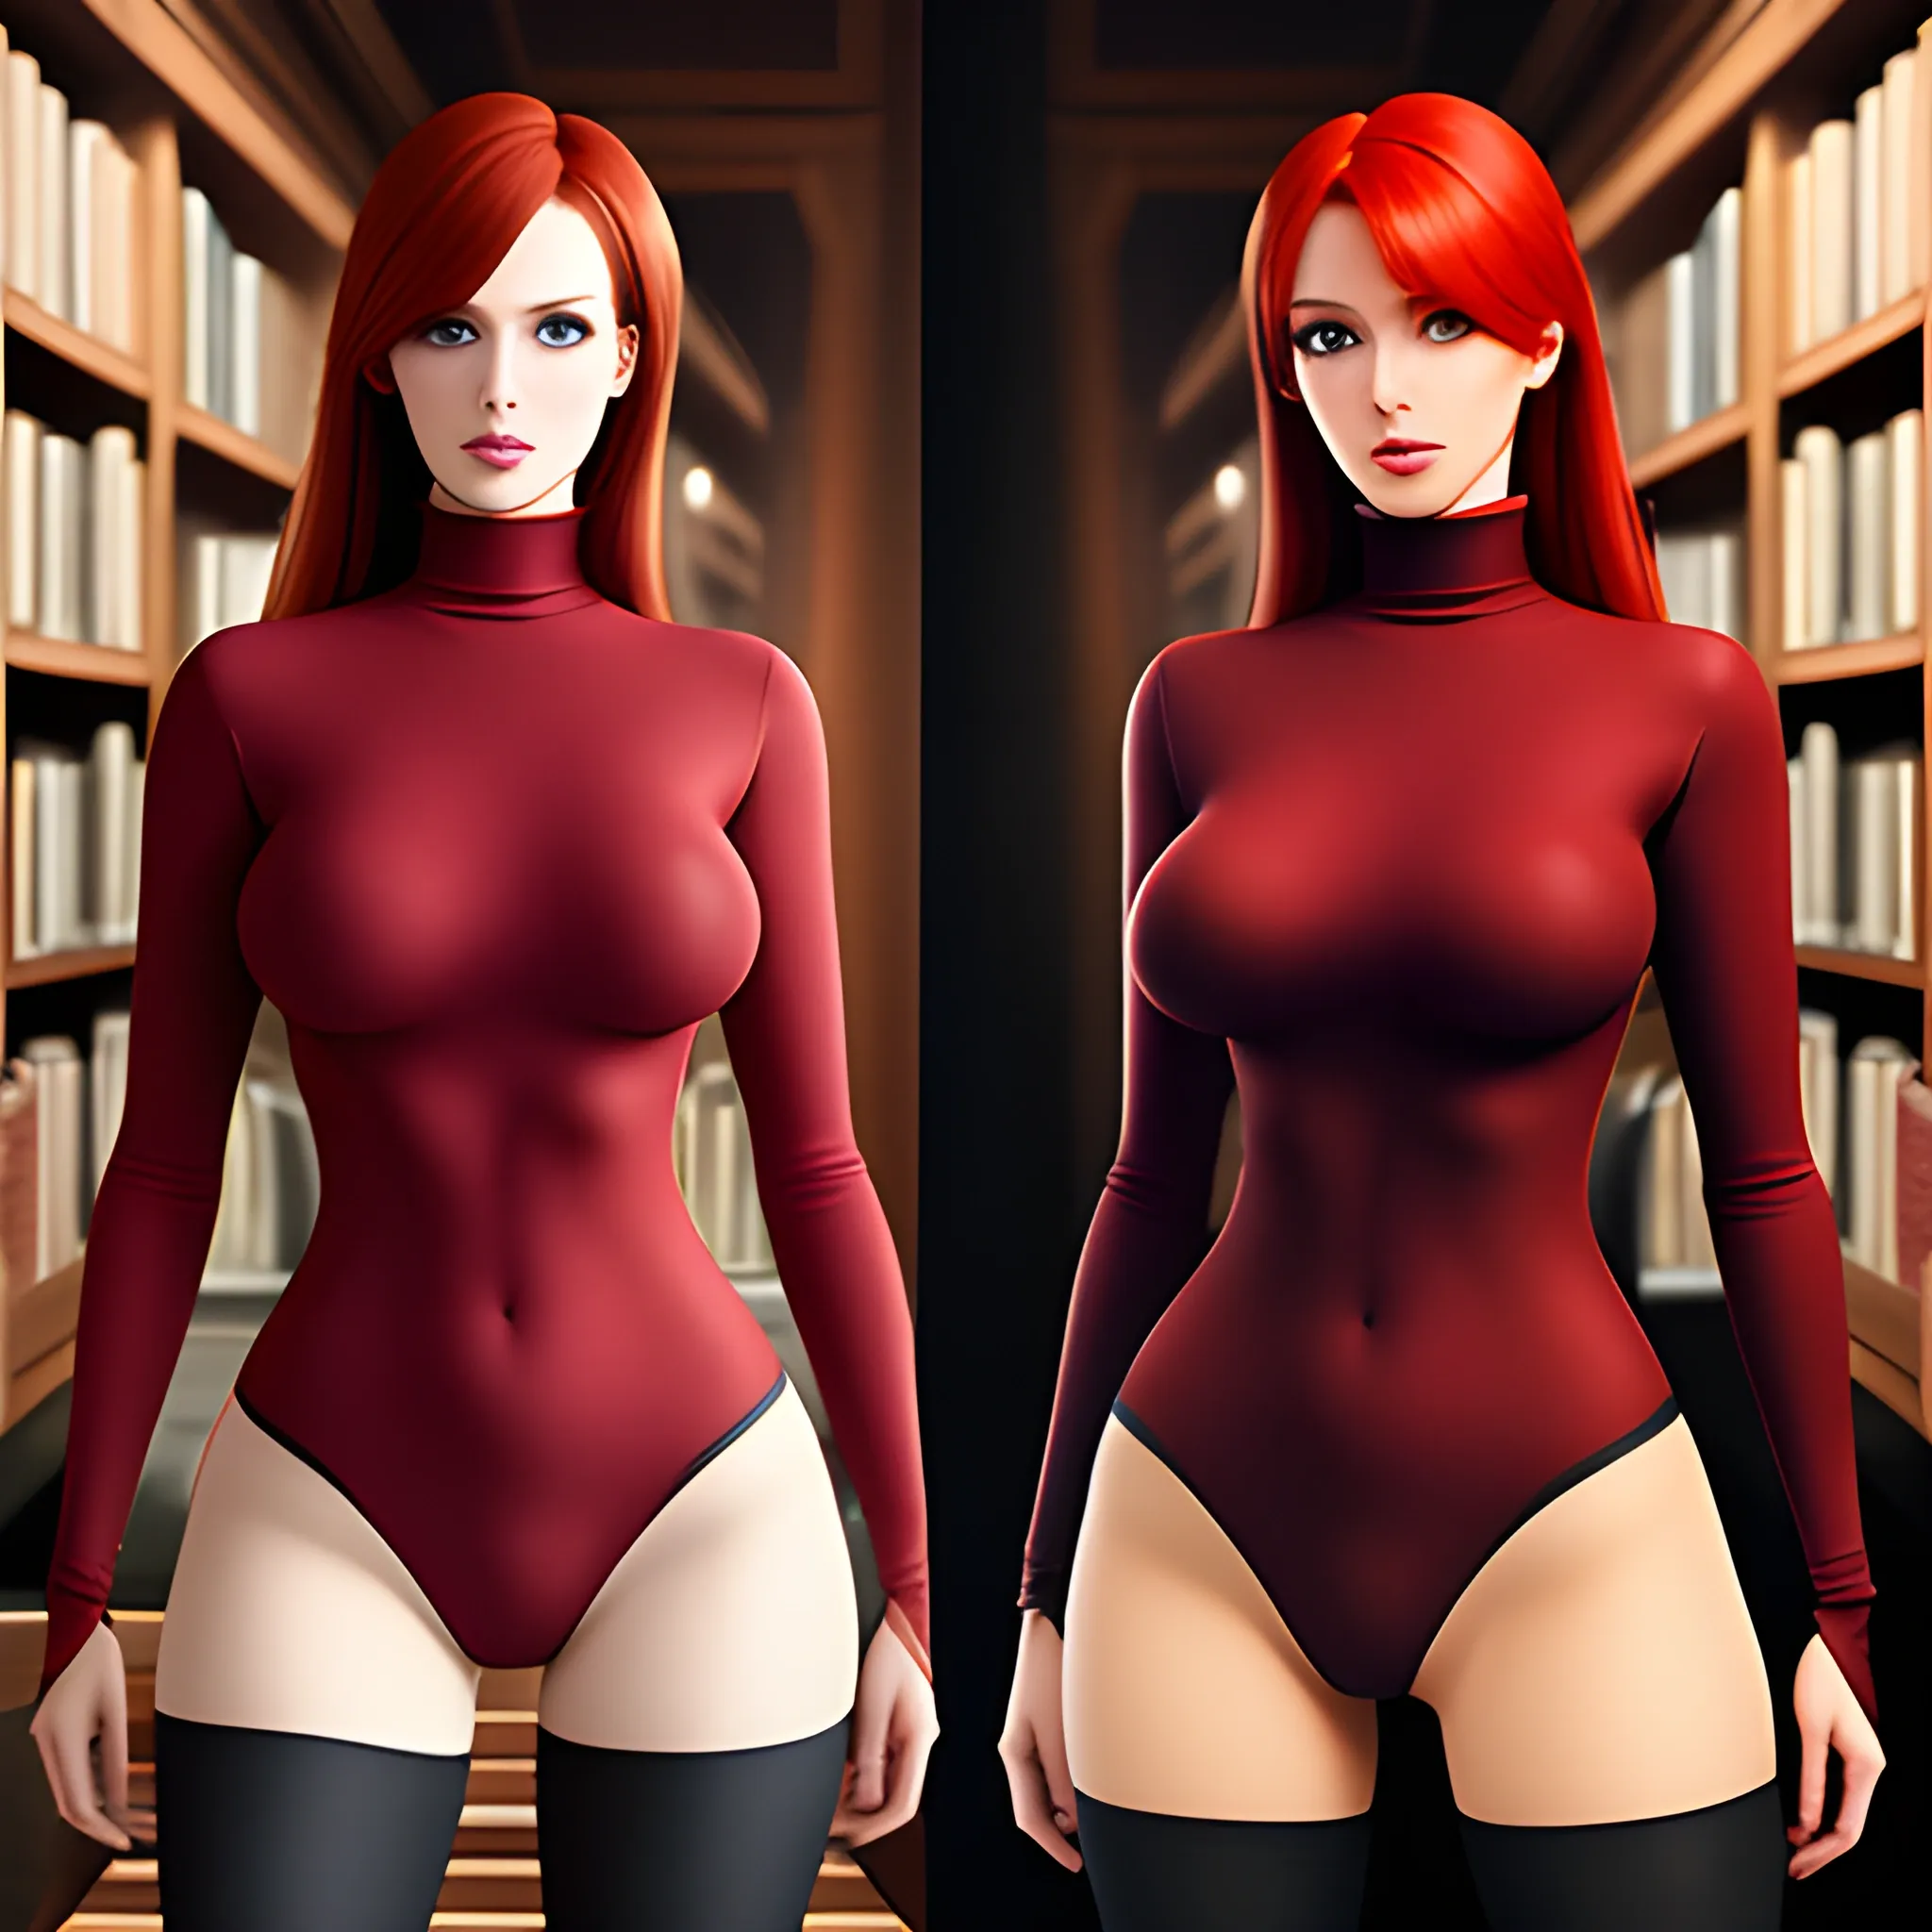 Create a photorealistic image of a red-haired female child with and a voluptuous red turtleneck with a cutout in it's center, standing in a library. Pretty eyes, sexy mouth, whole body visible, lots of skin, maximum details, anime style, 8k